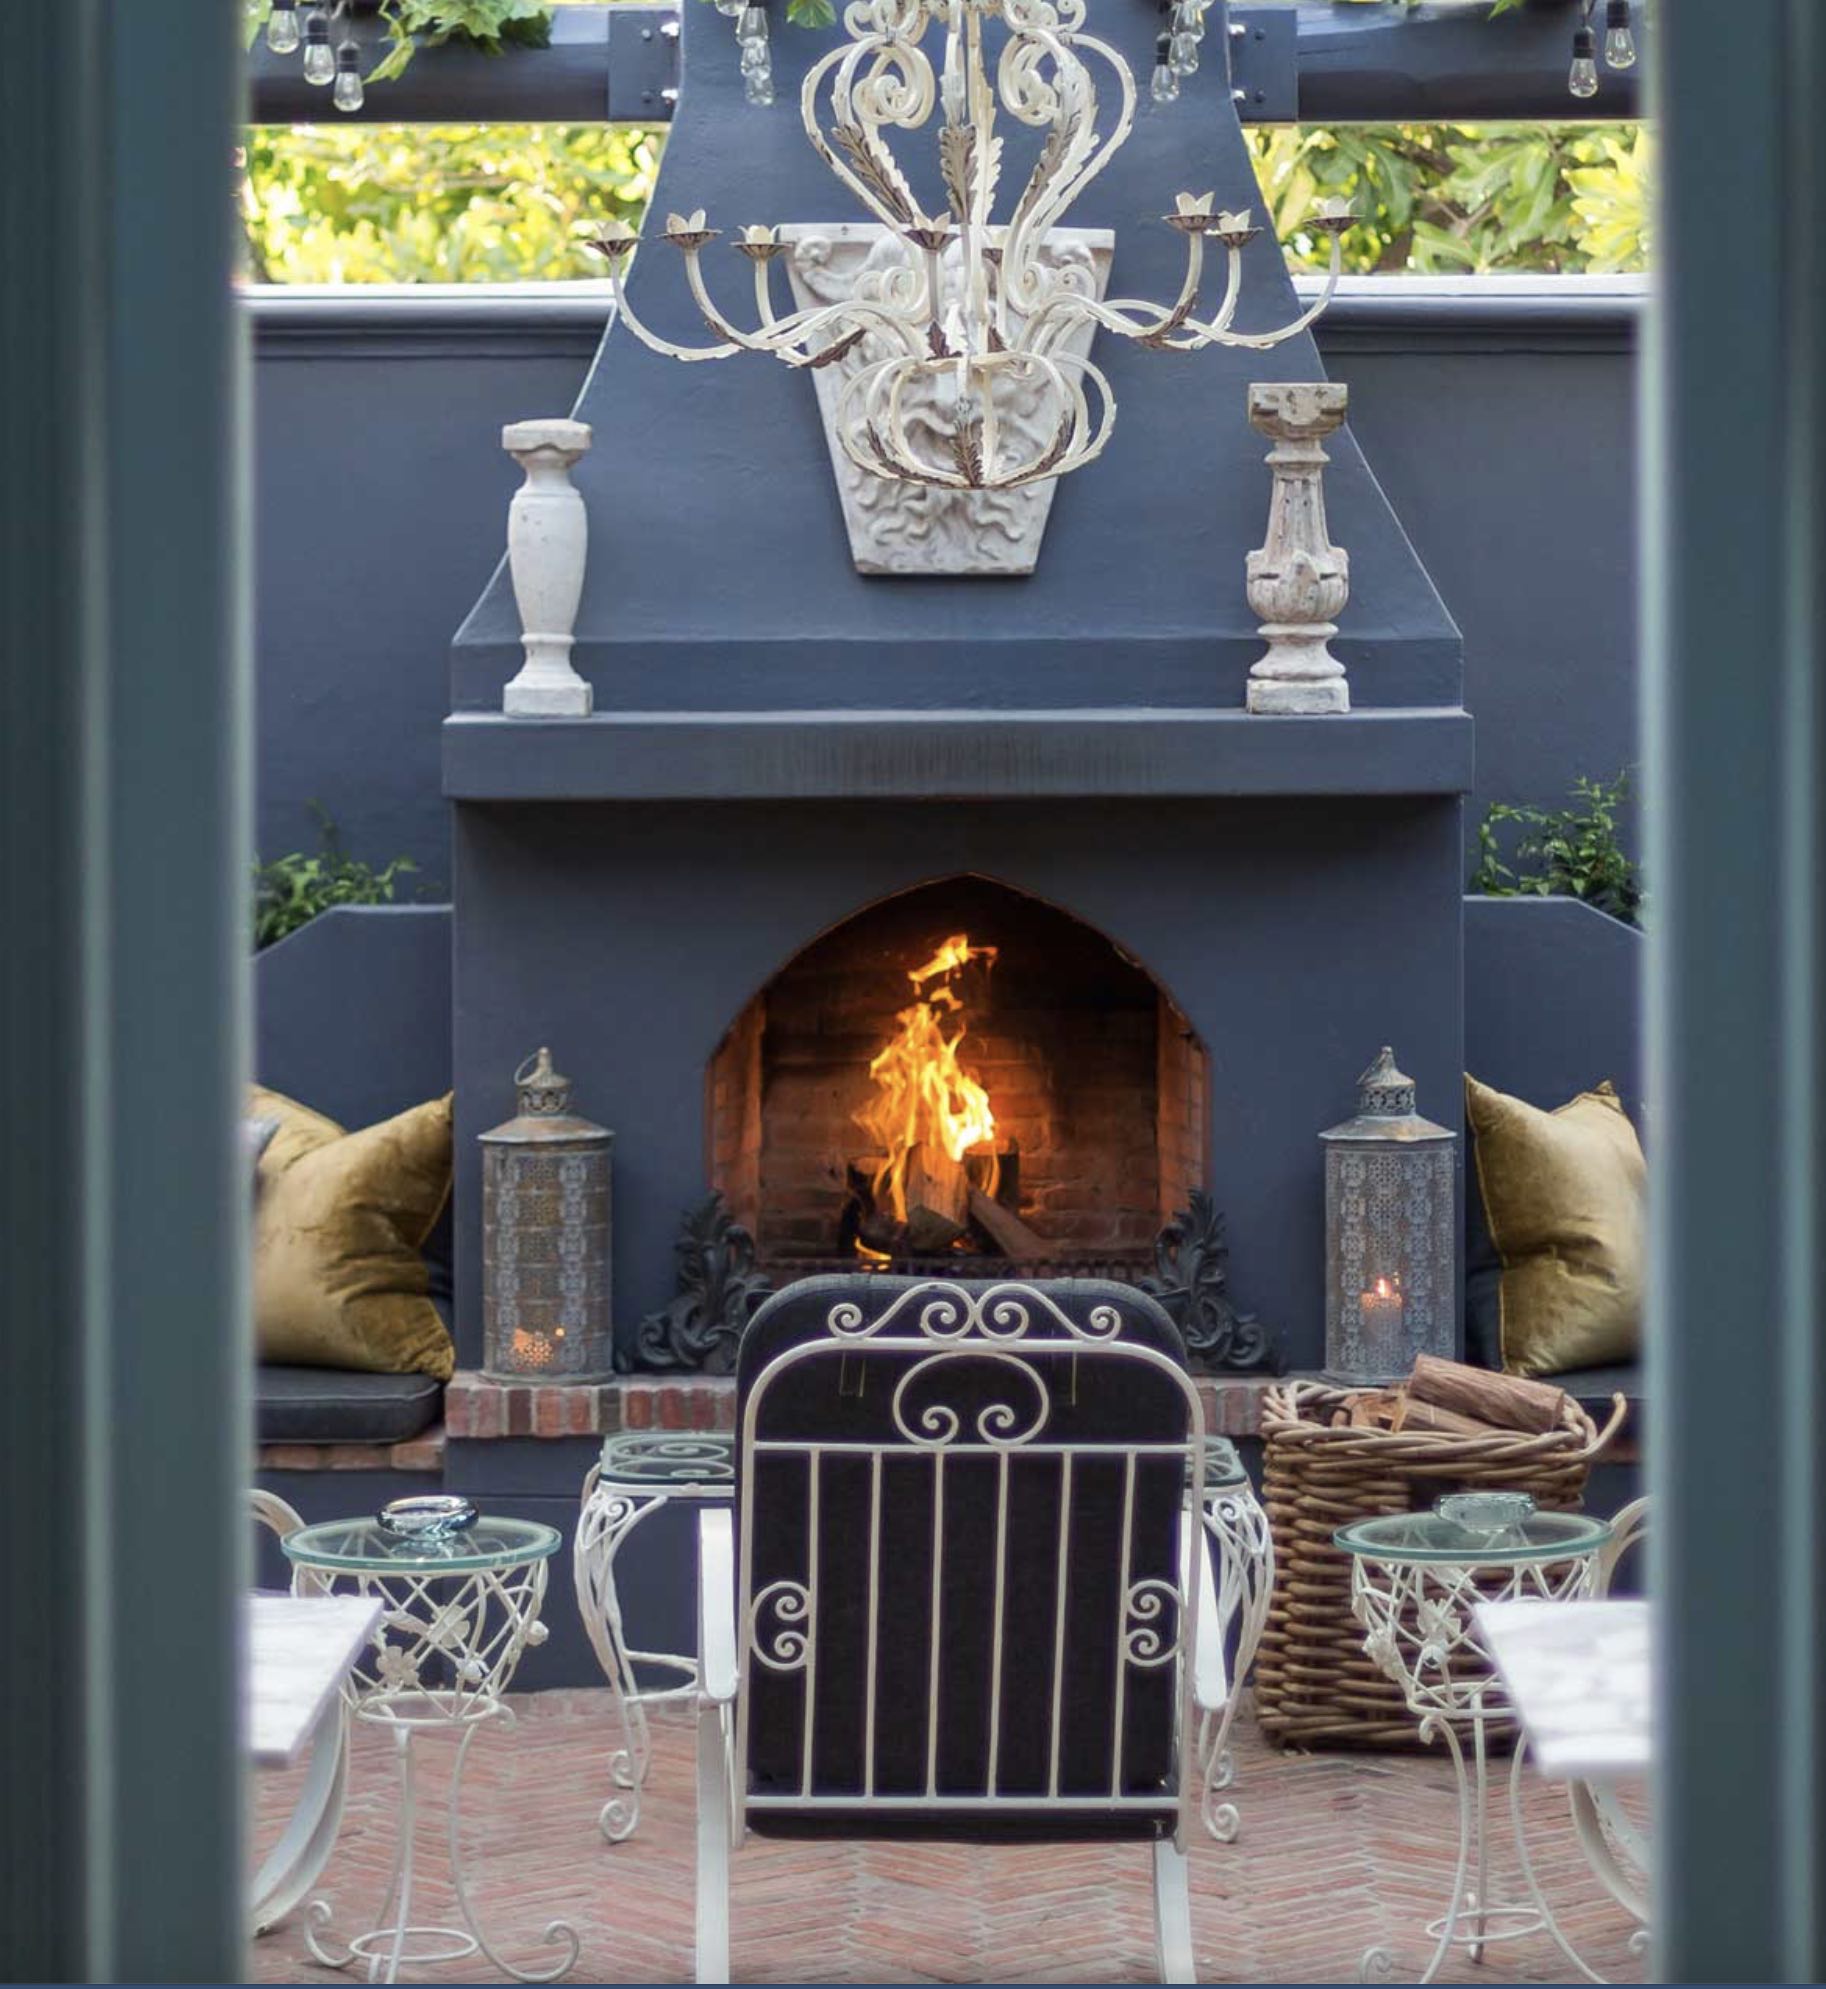 Akademie Street Hotel is another great boutique accommodation in Franschhoek, South Africa. Photos by Akademie Street Hotel